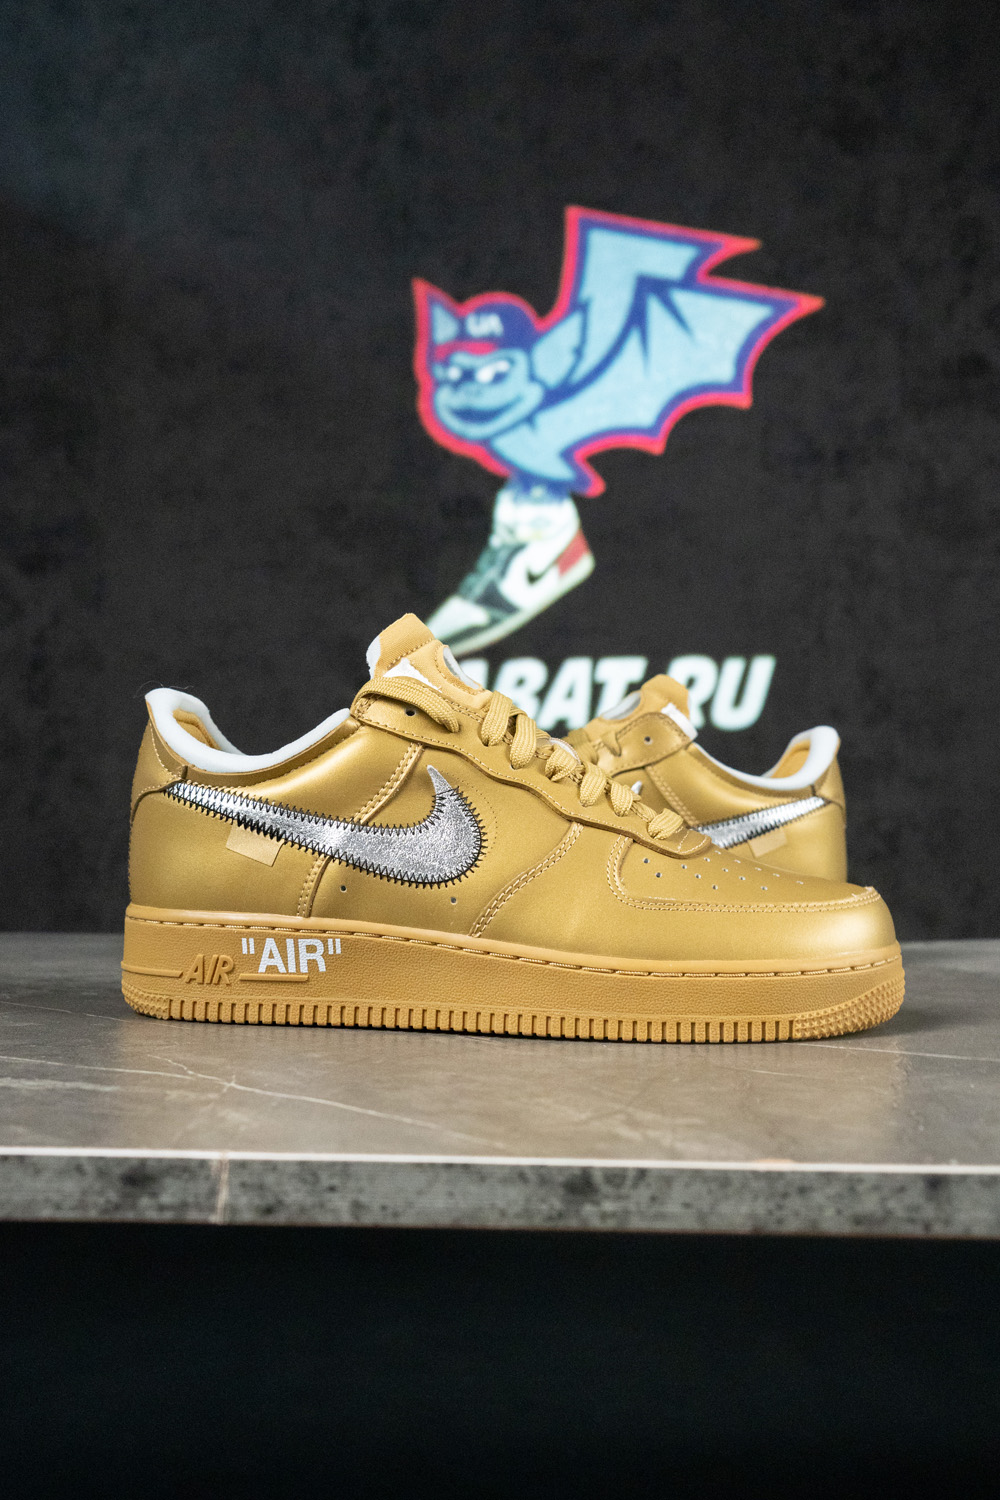 OFF WHITE & Nike Air Force 1 Low Gold